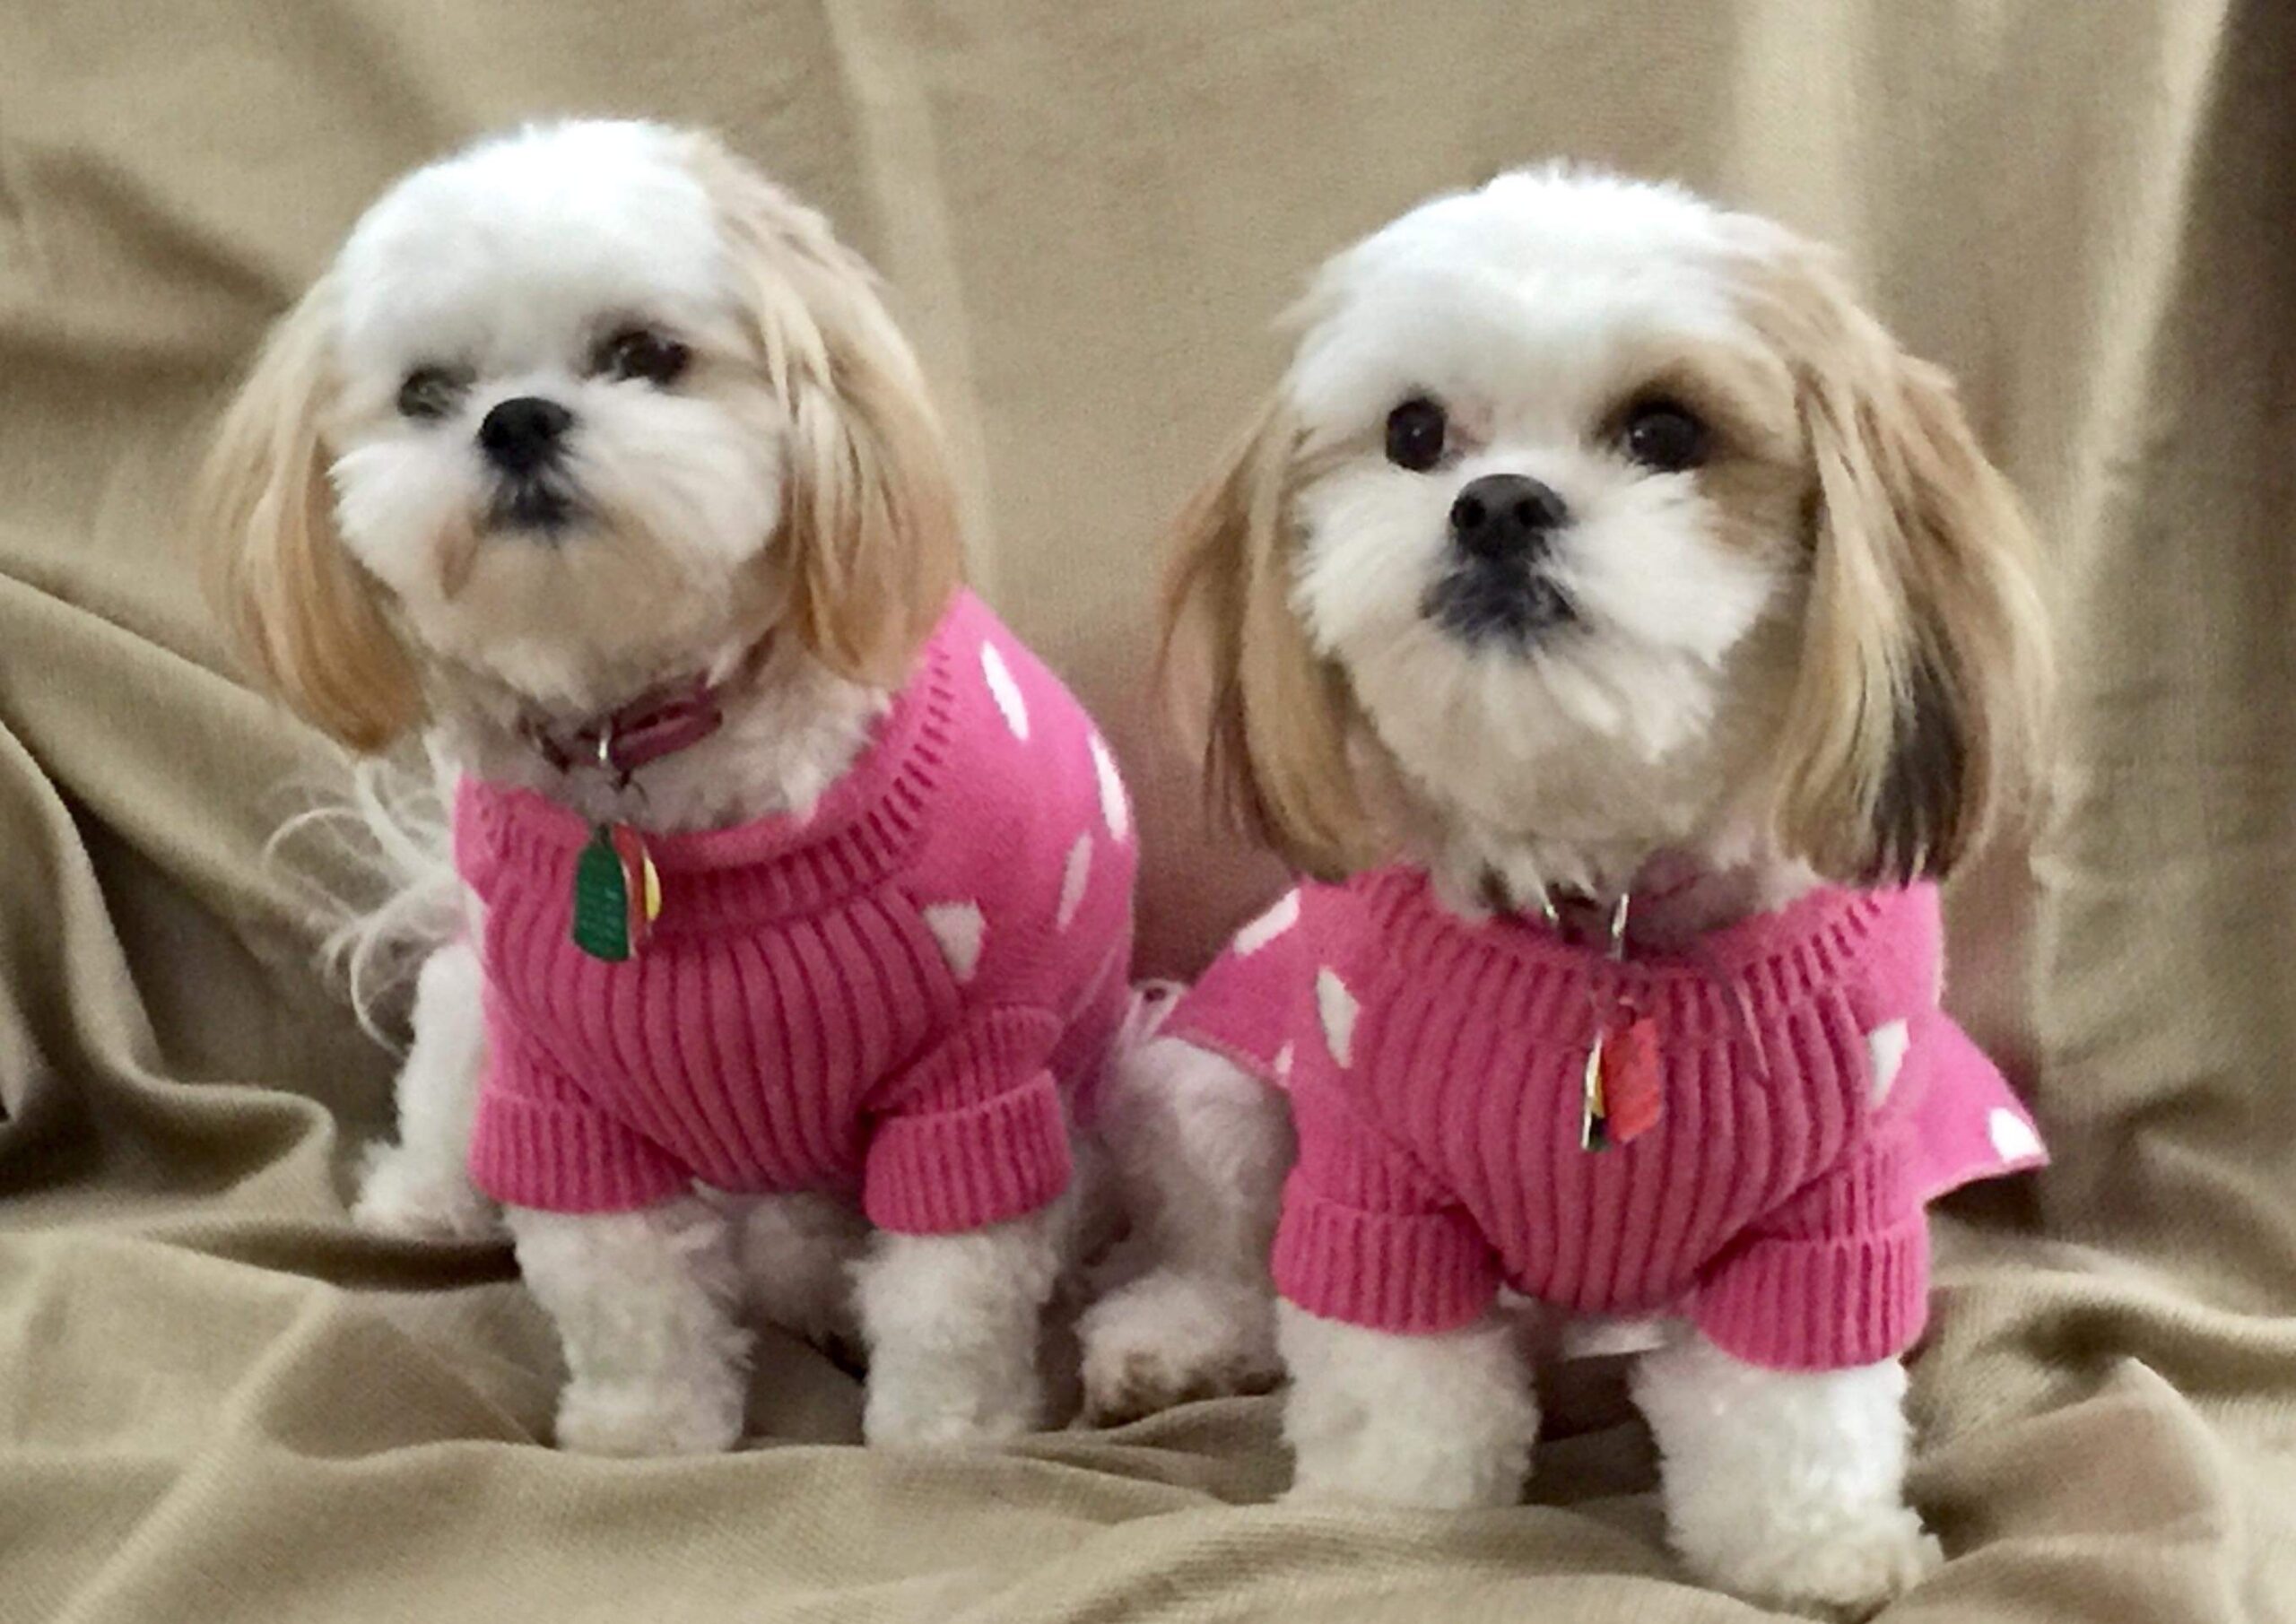 Picture of 2 sister "Teddy Bear Puppies" wearing pink weaters